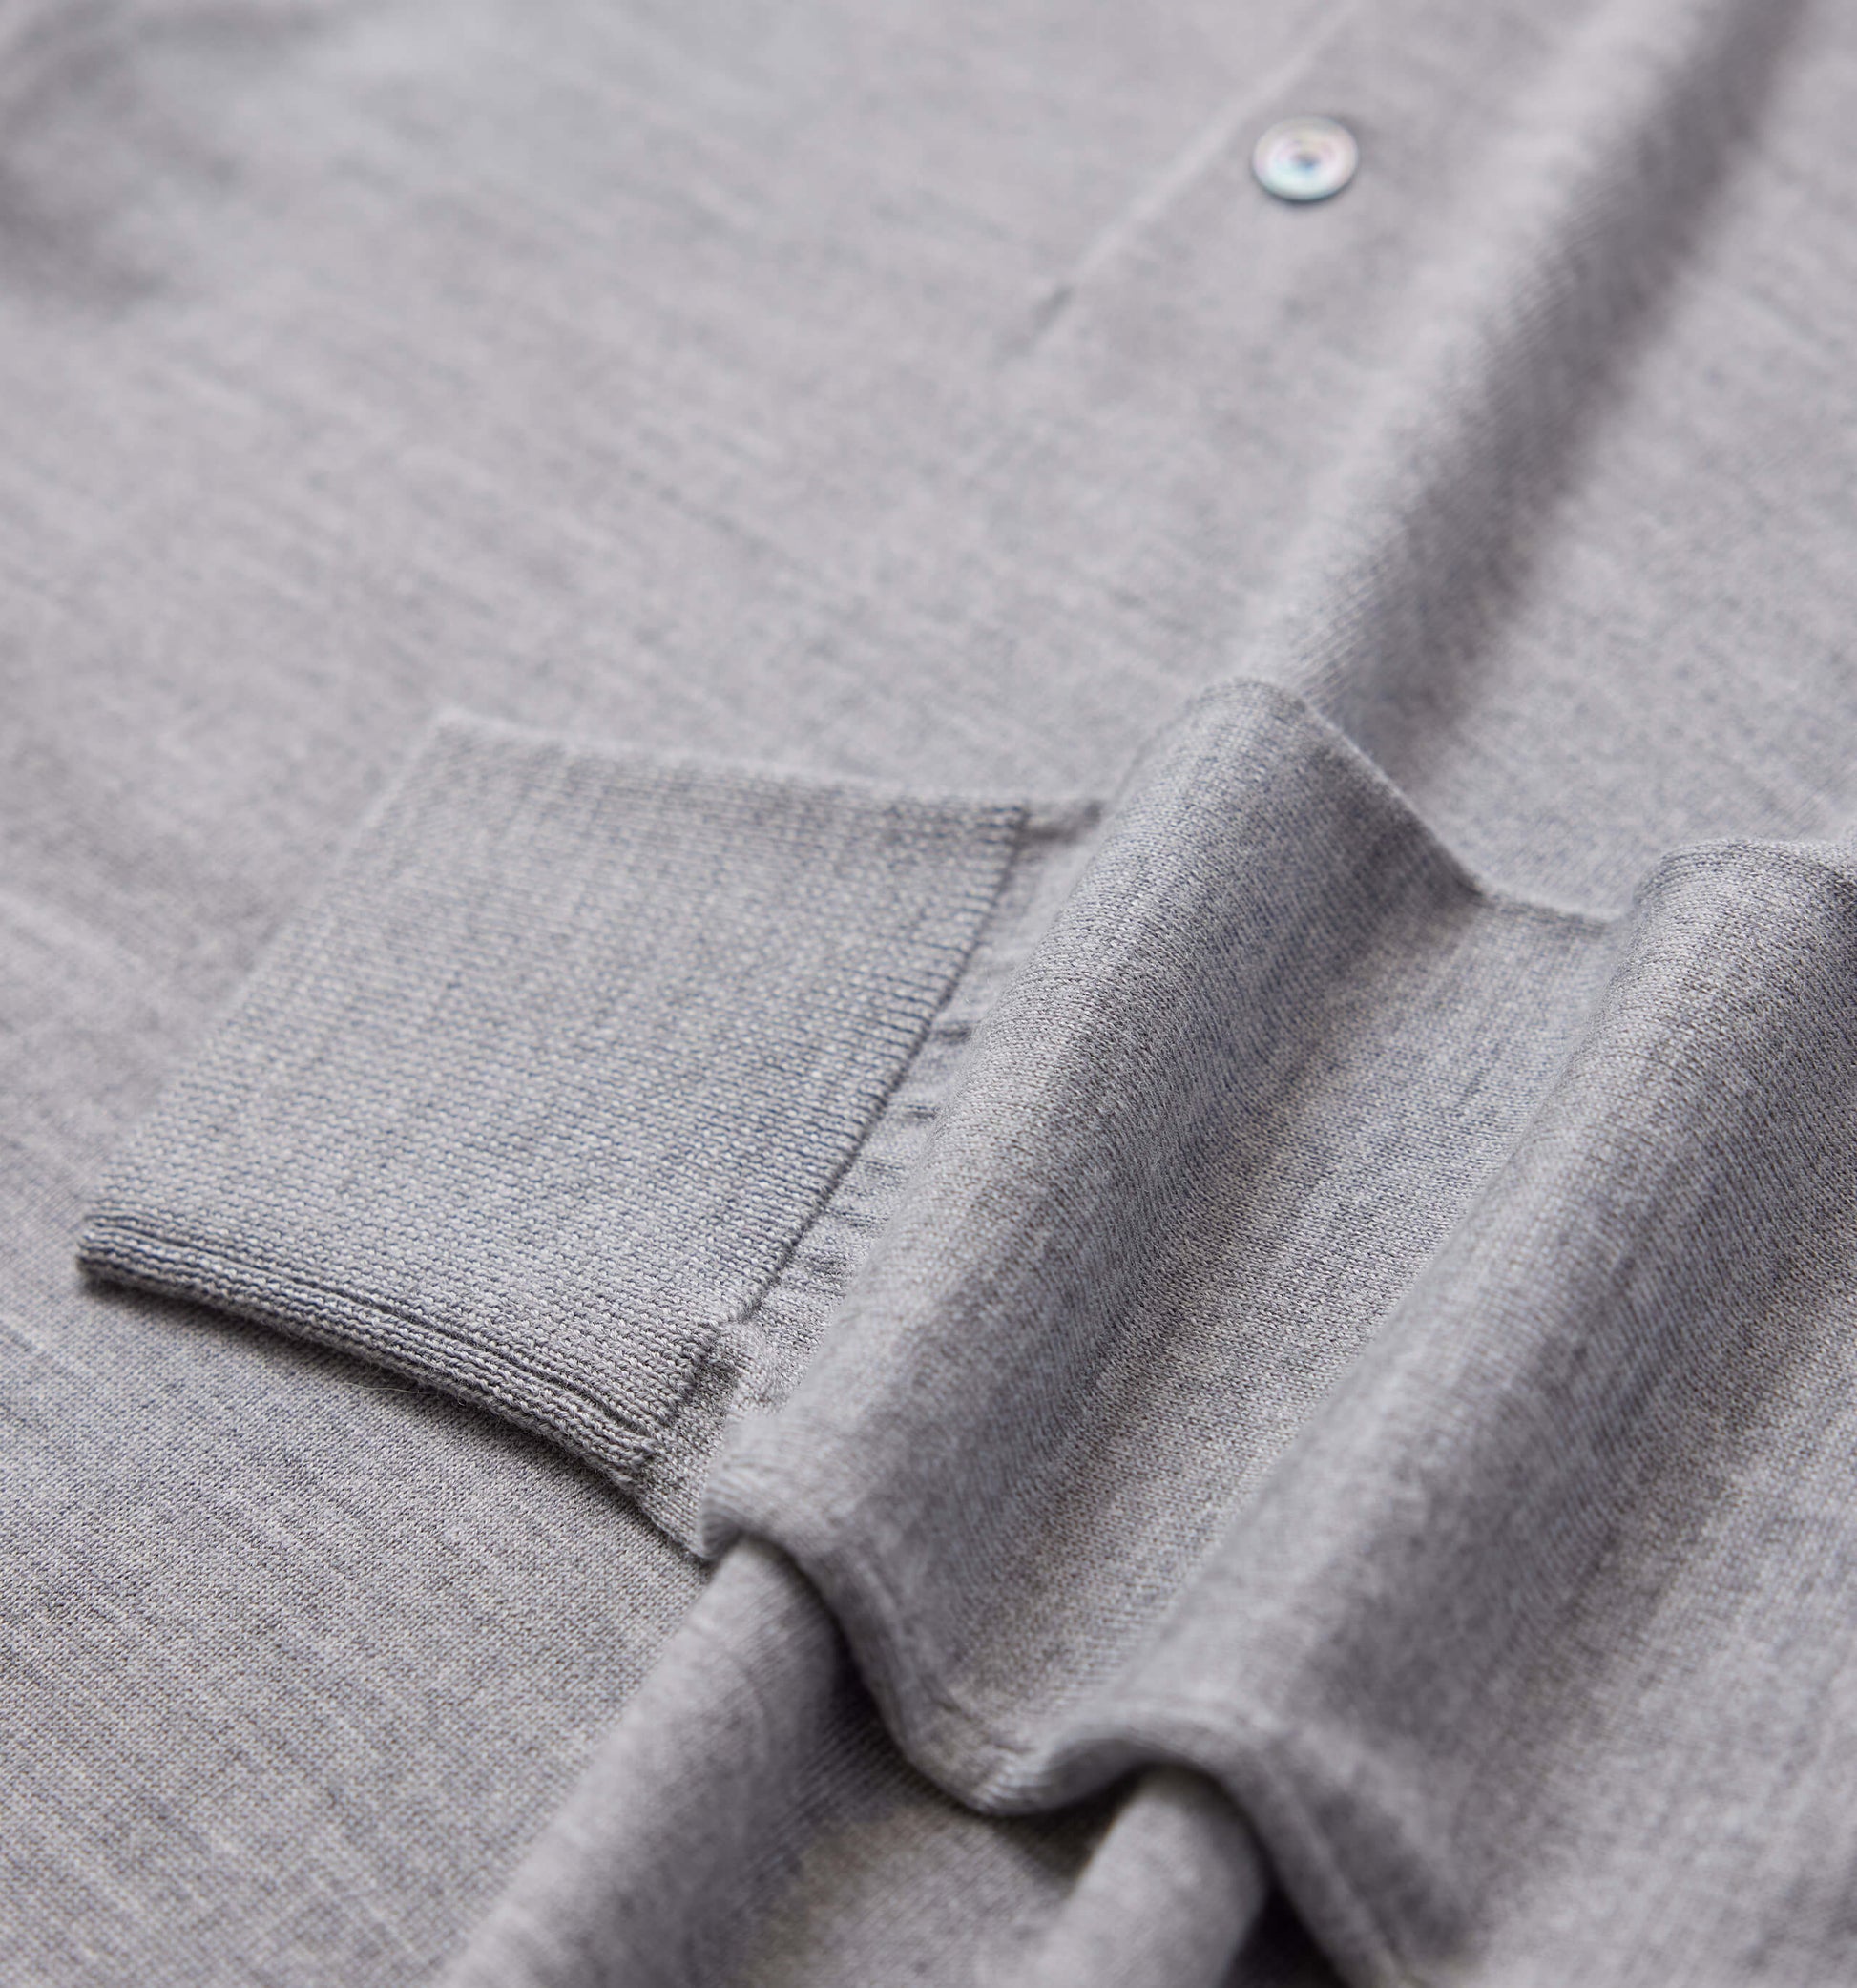 The Robert - Merino Wool Polo In Grey From King Essentials